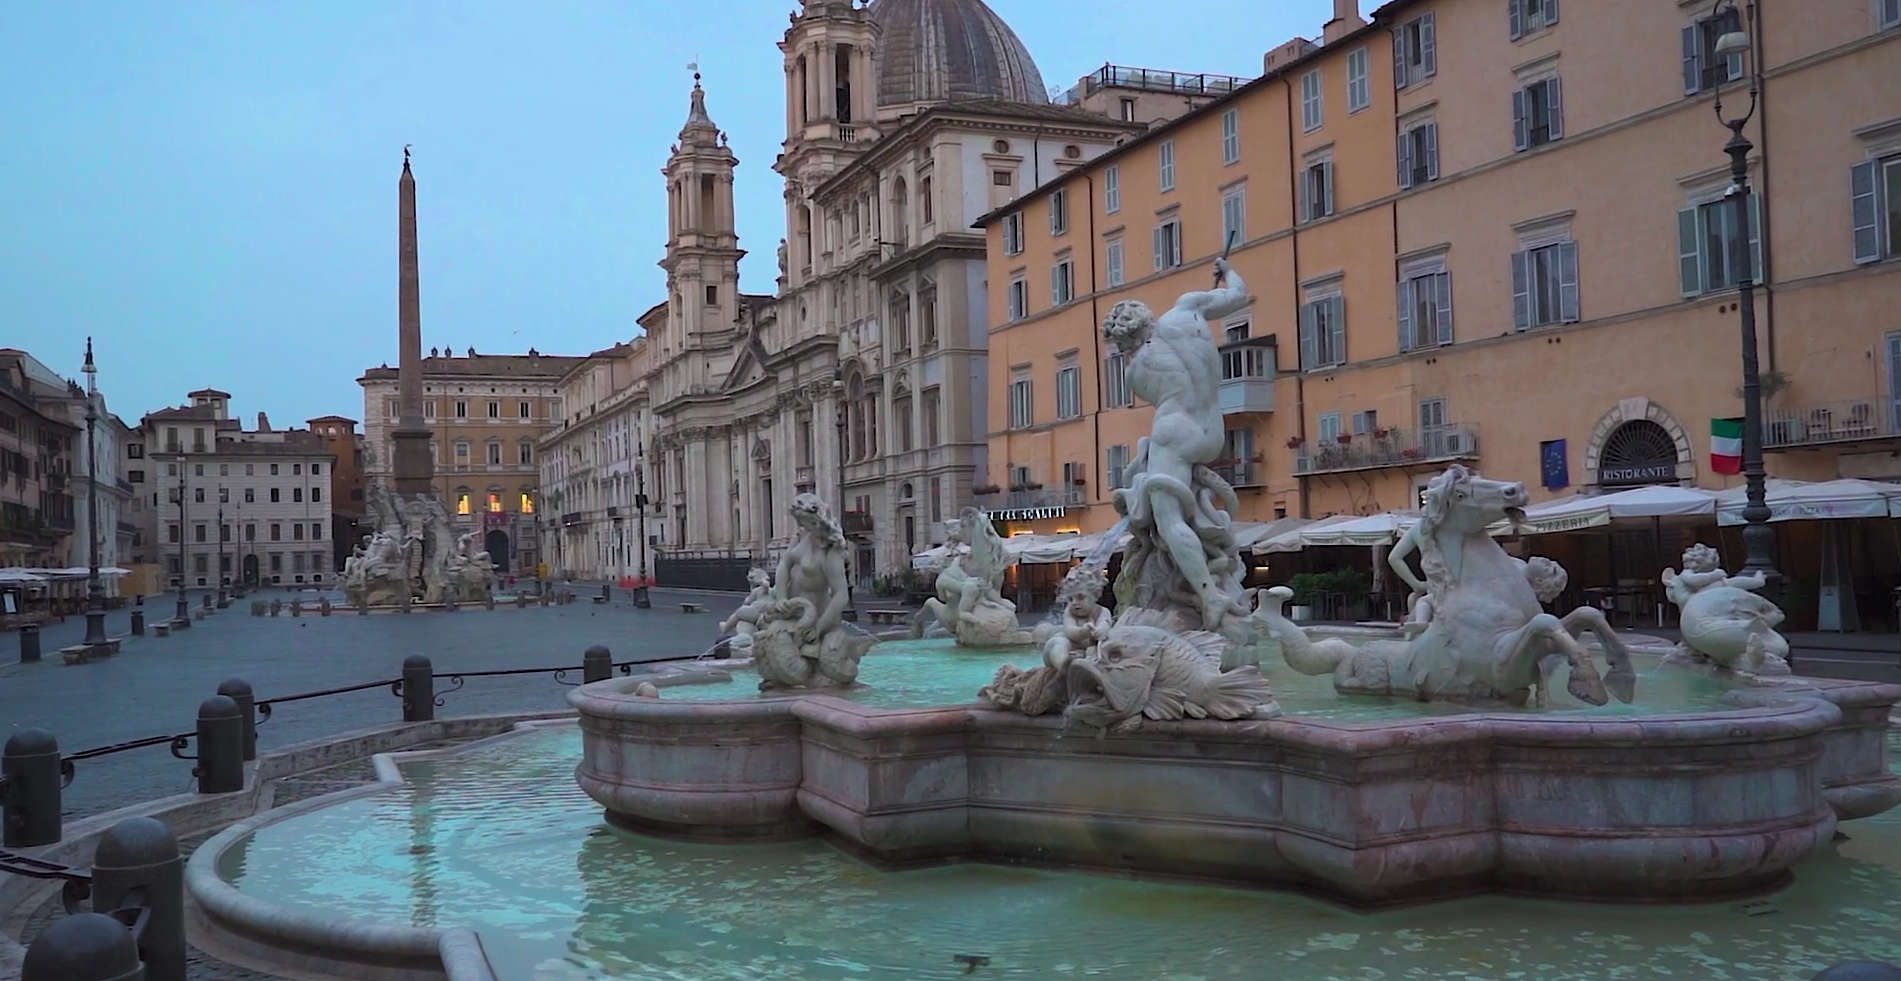 Piazza Navona and Sant'Agnese in Agone